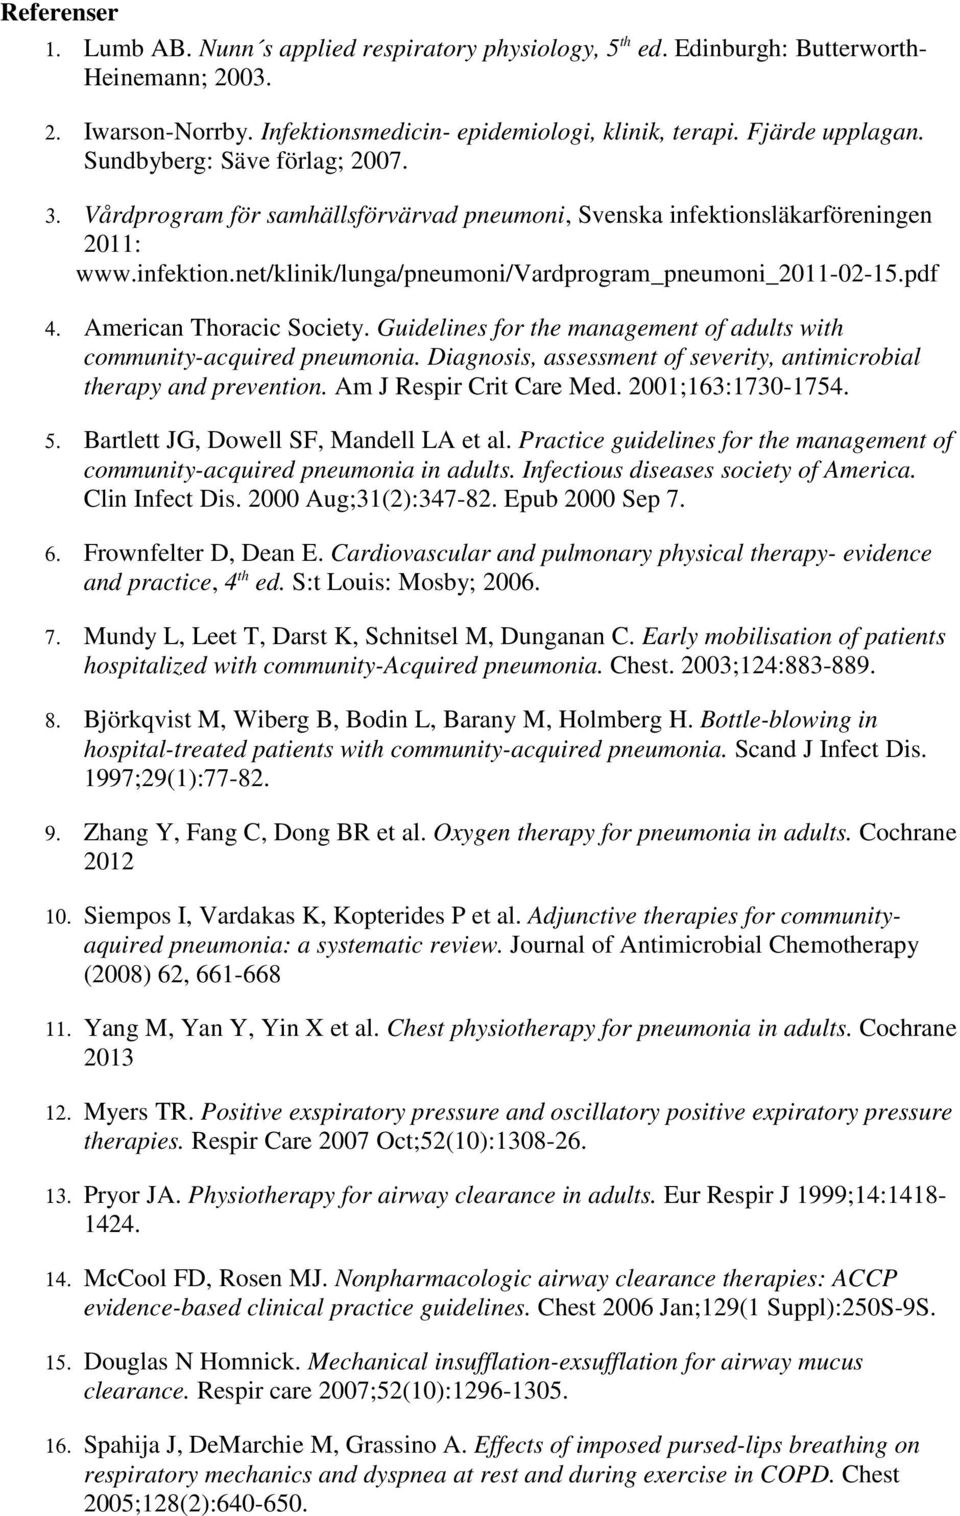 American Thoracic Society. Guidelines for the management of adults with community-acquired pneumonia. Diagnosis, assessment of severity, antimicrobial therapy and prevention.